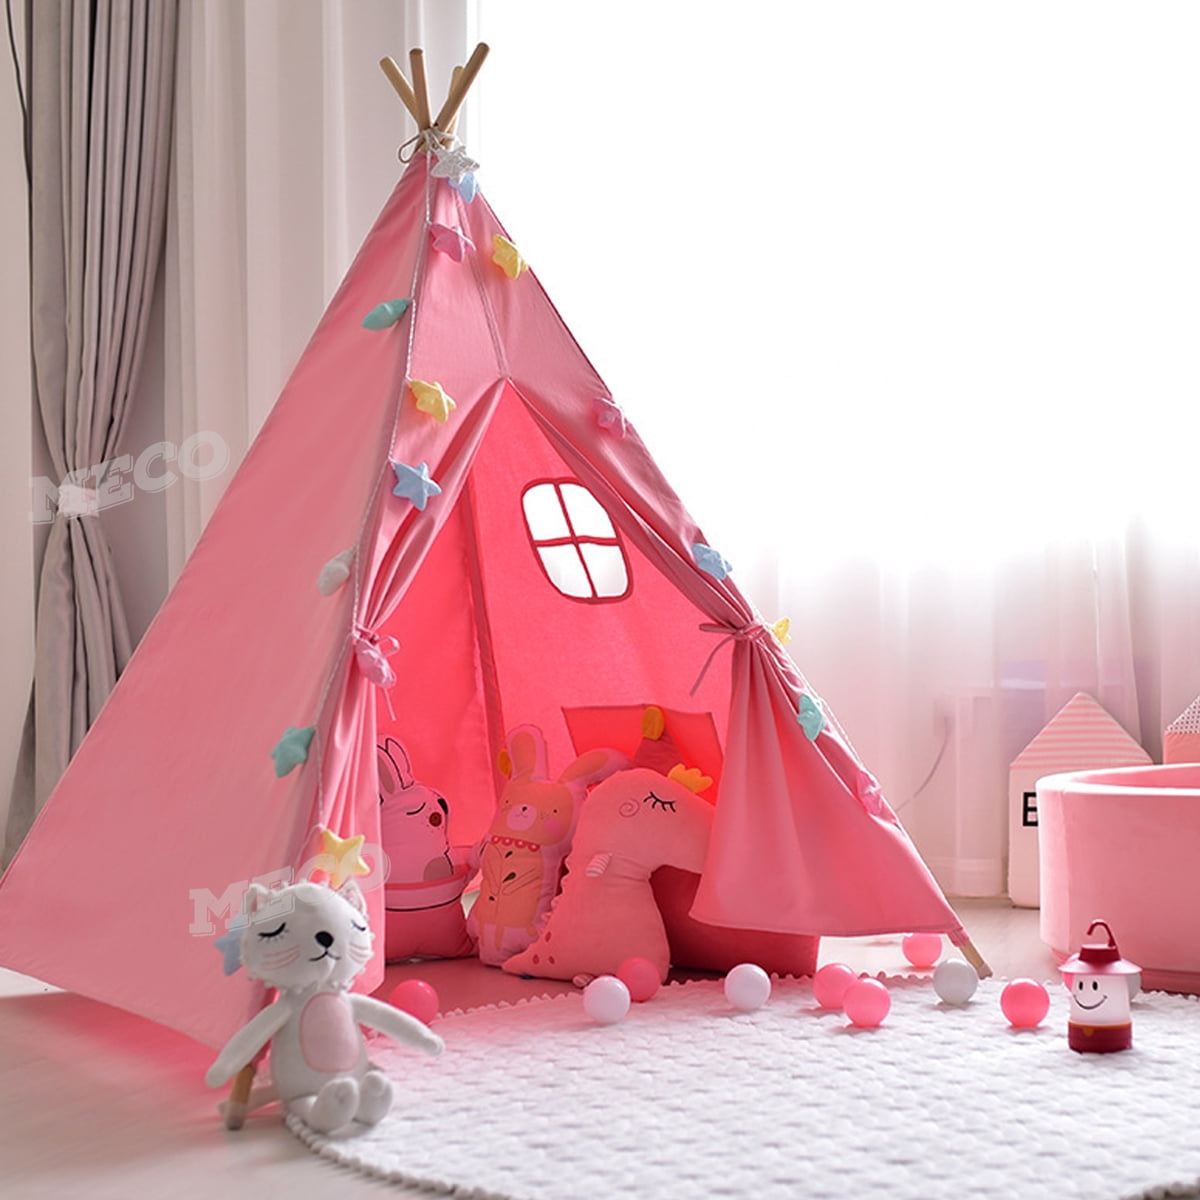 Kids Teepee Tent Wigwam Indoor Outdoor Decoration Children Play House White Pink 